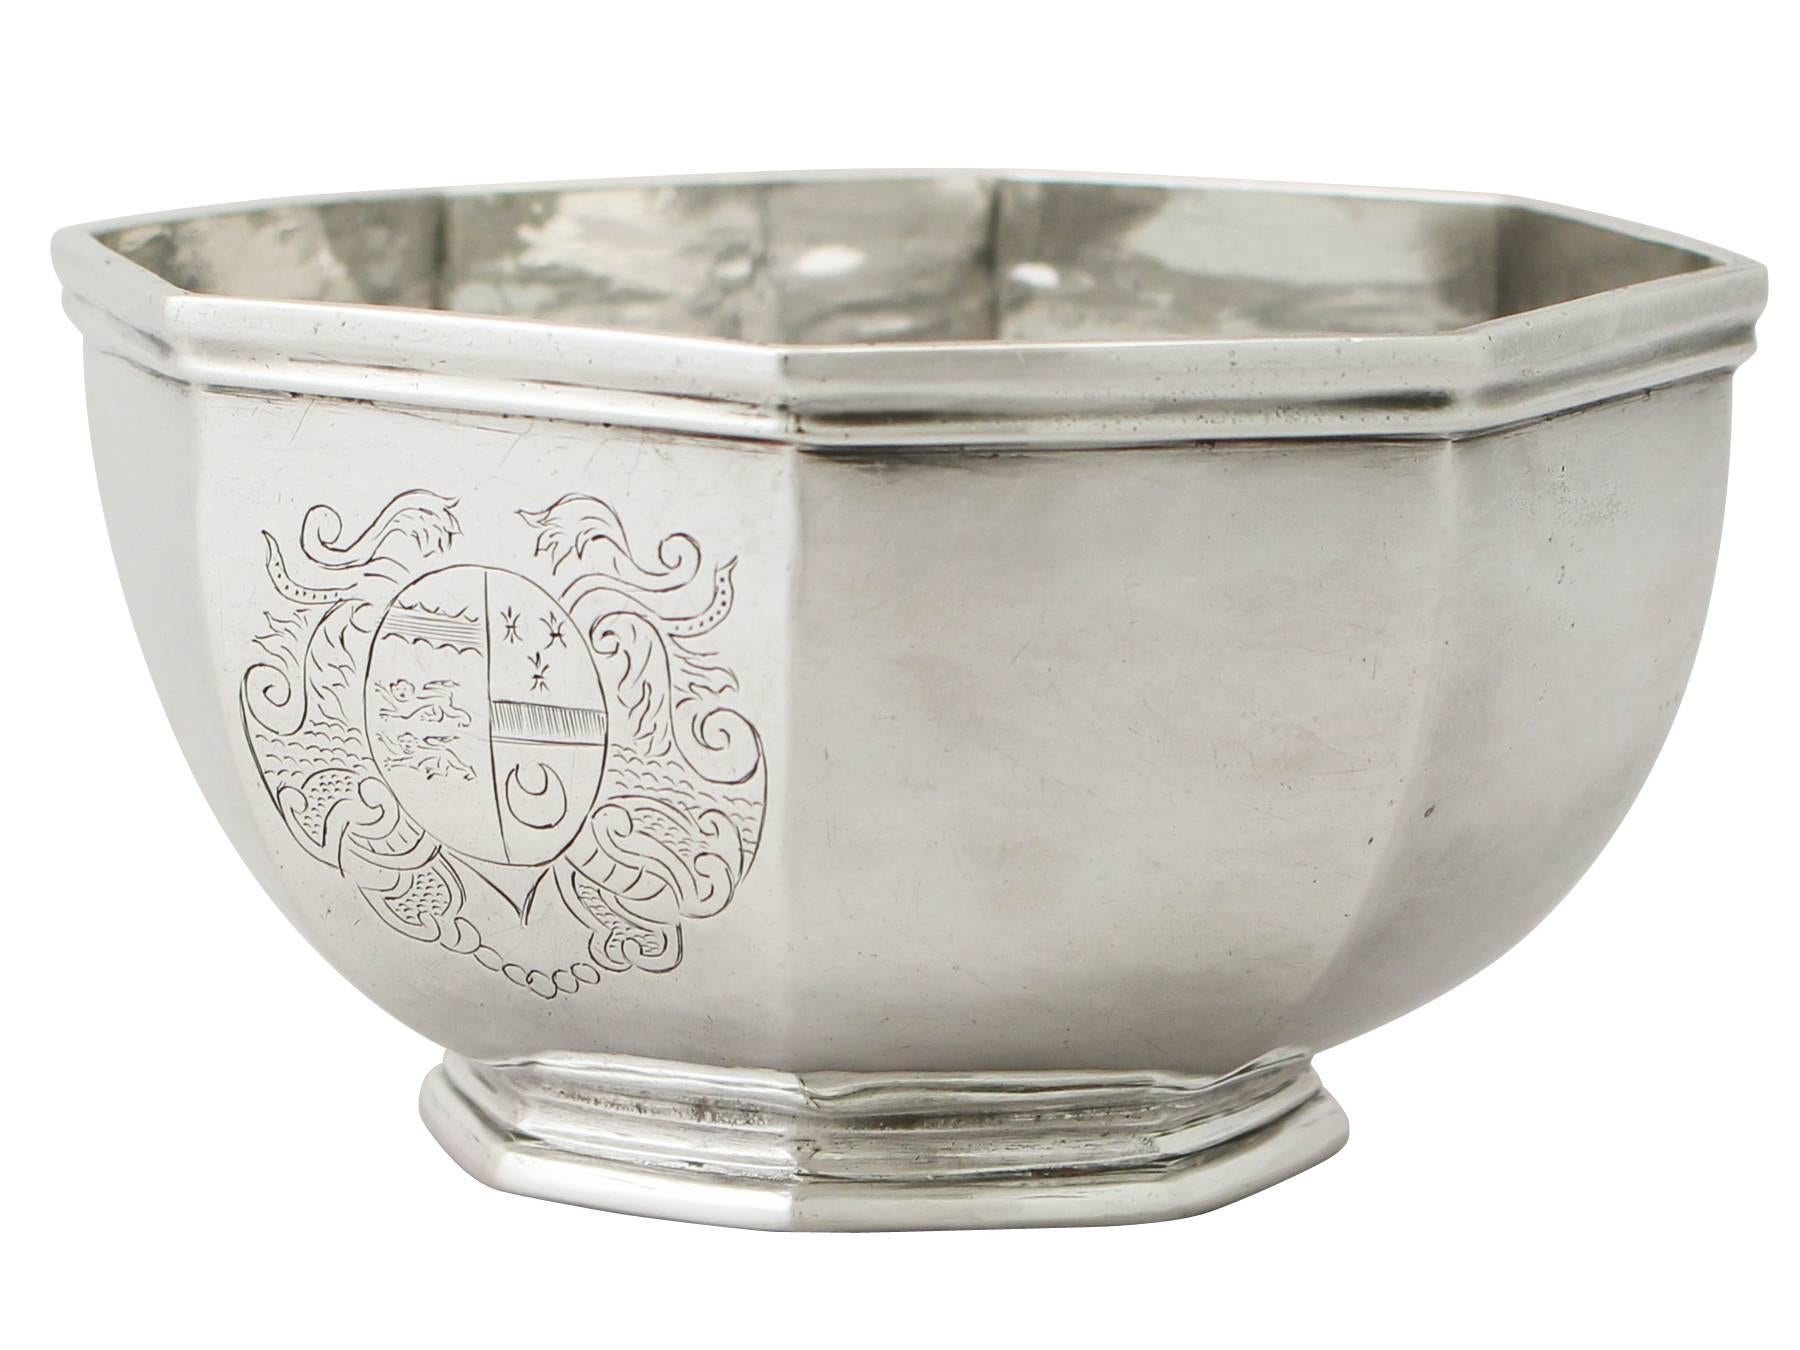 An exceptional, fine and impressive antique Queen Anne English Britannia standard silver bowl made by James Rood; an addition to our 18th century silverware collection.

This exceptional antique Queen Anne Britannia standard silver* bowl has a